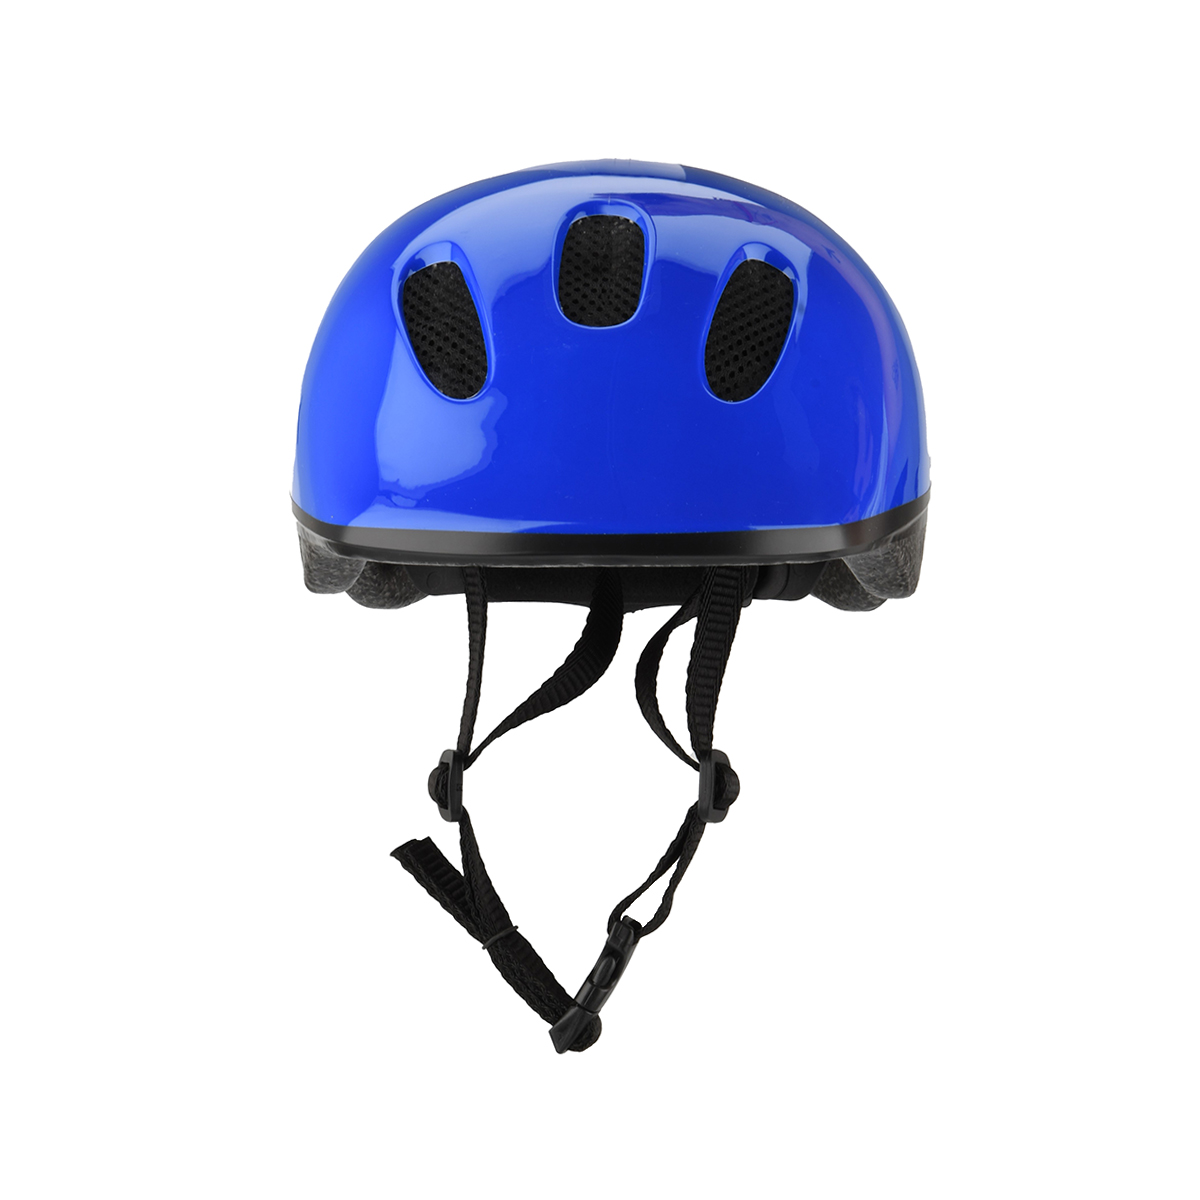 Casco Ciclismo M-Wave Standard para Niños,  image number null